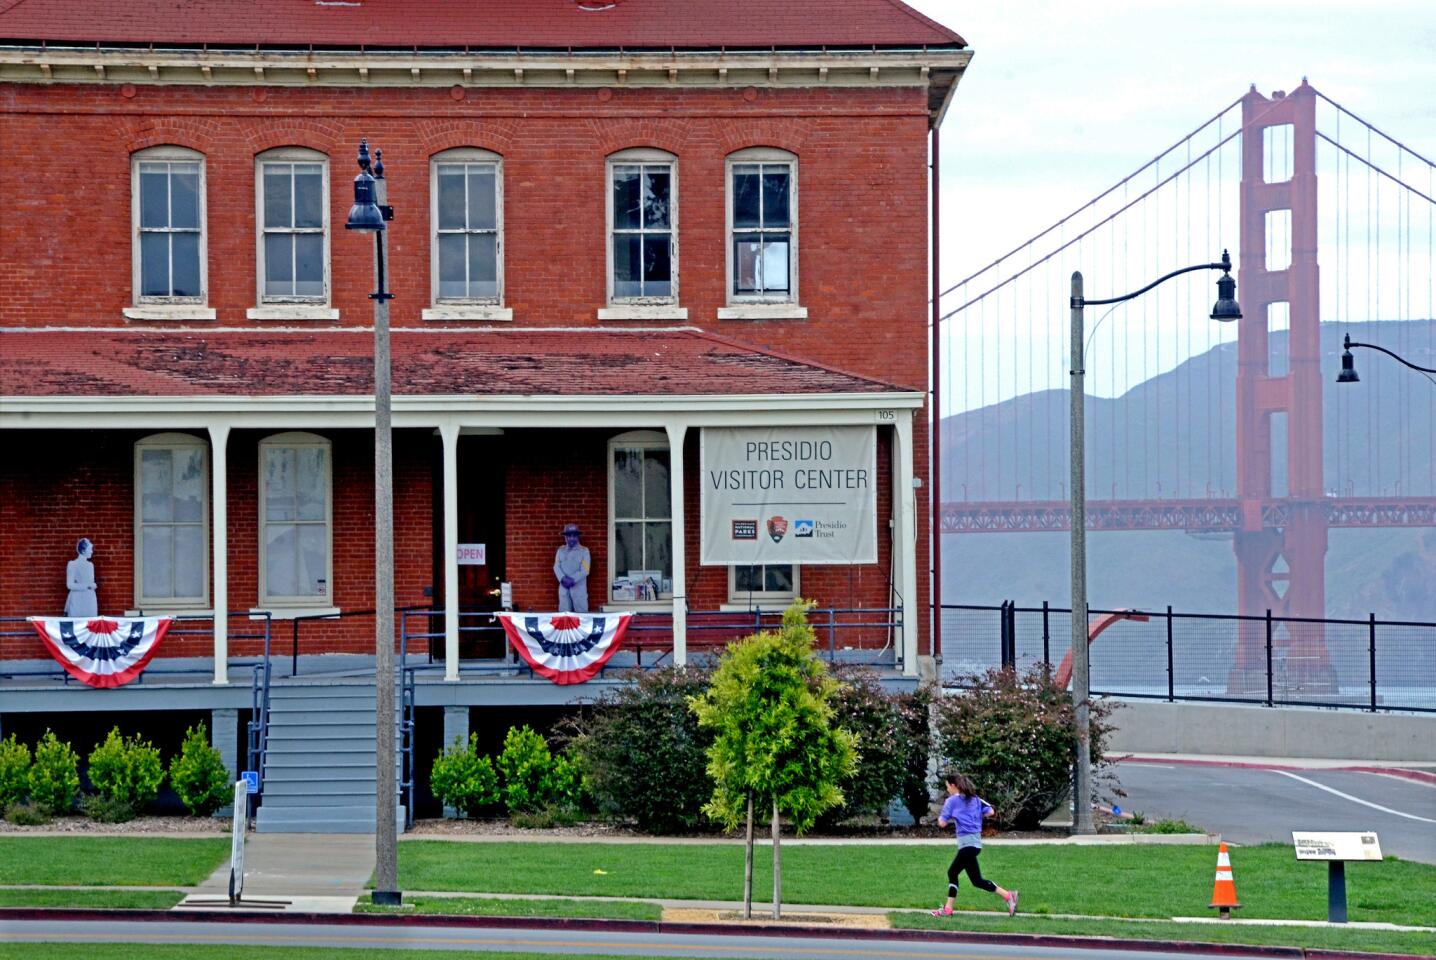 The Presidio has undergone steady improvements since the National Park Service took over the 1,491-acre site in 1994.